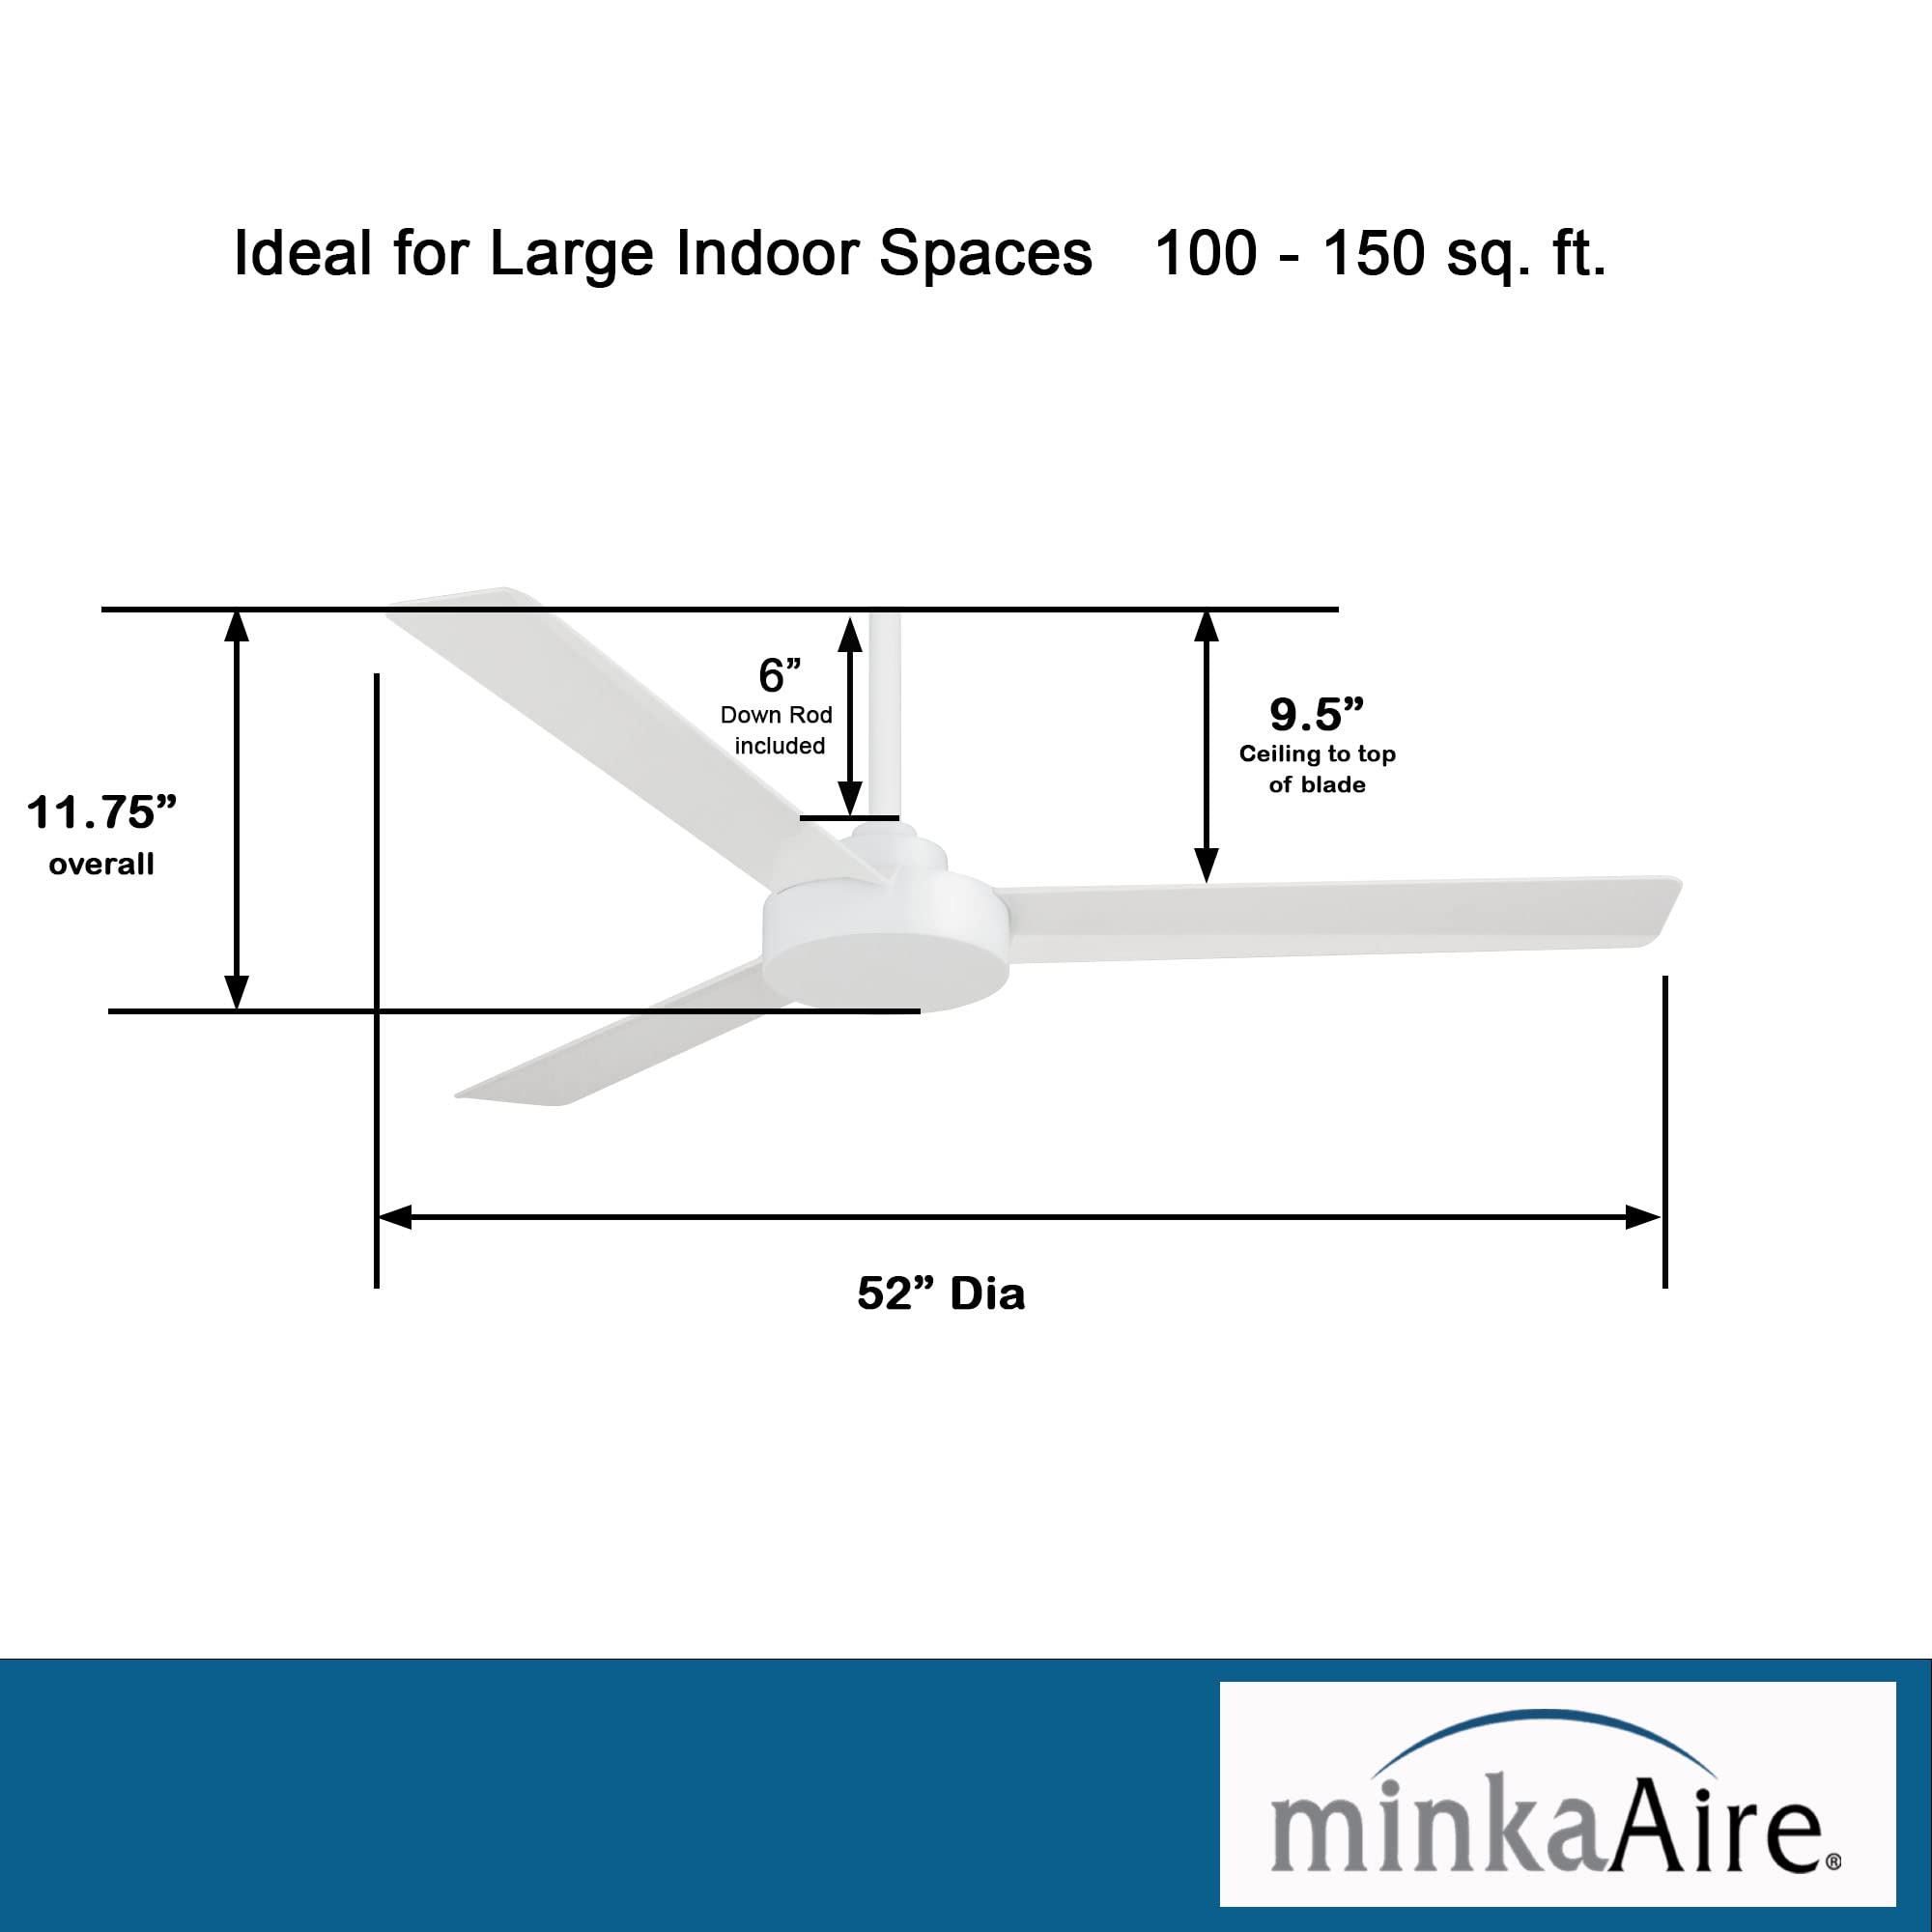 MINKA-AIRE F524-WHF Roto 52 Inch Ceiling Fan 3 Blades in Flat White Finish